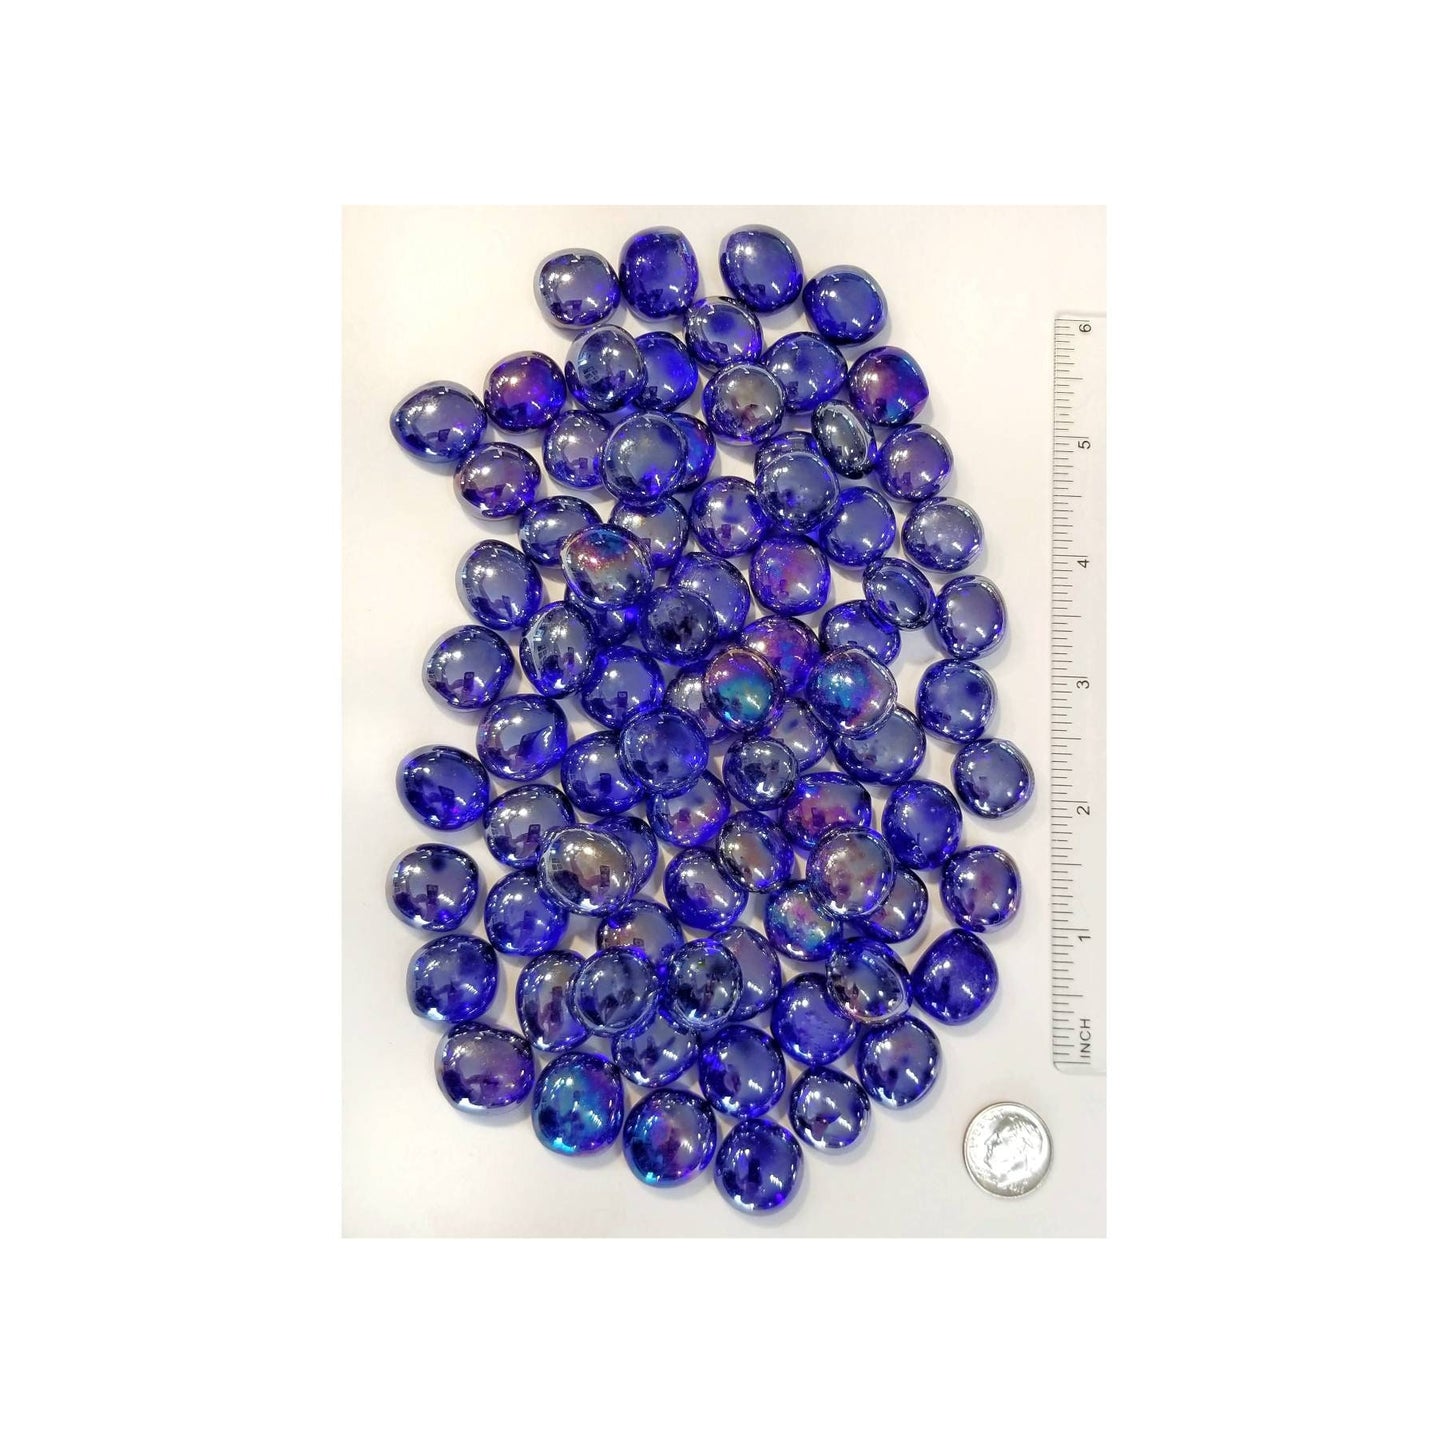 Glass Gems for Stained Glass, Jewelry Making Supply, Kids Teen Craft Project. Flat Marbles, as pictured. Iridescent Cobalt Blue, medium size